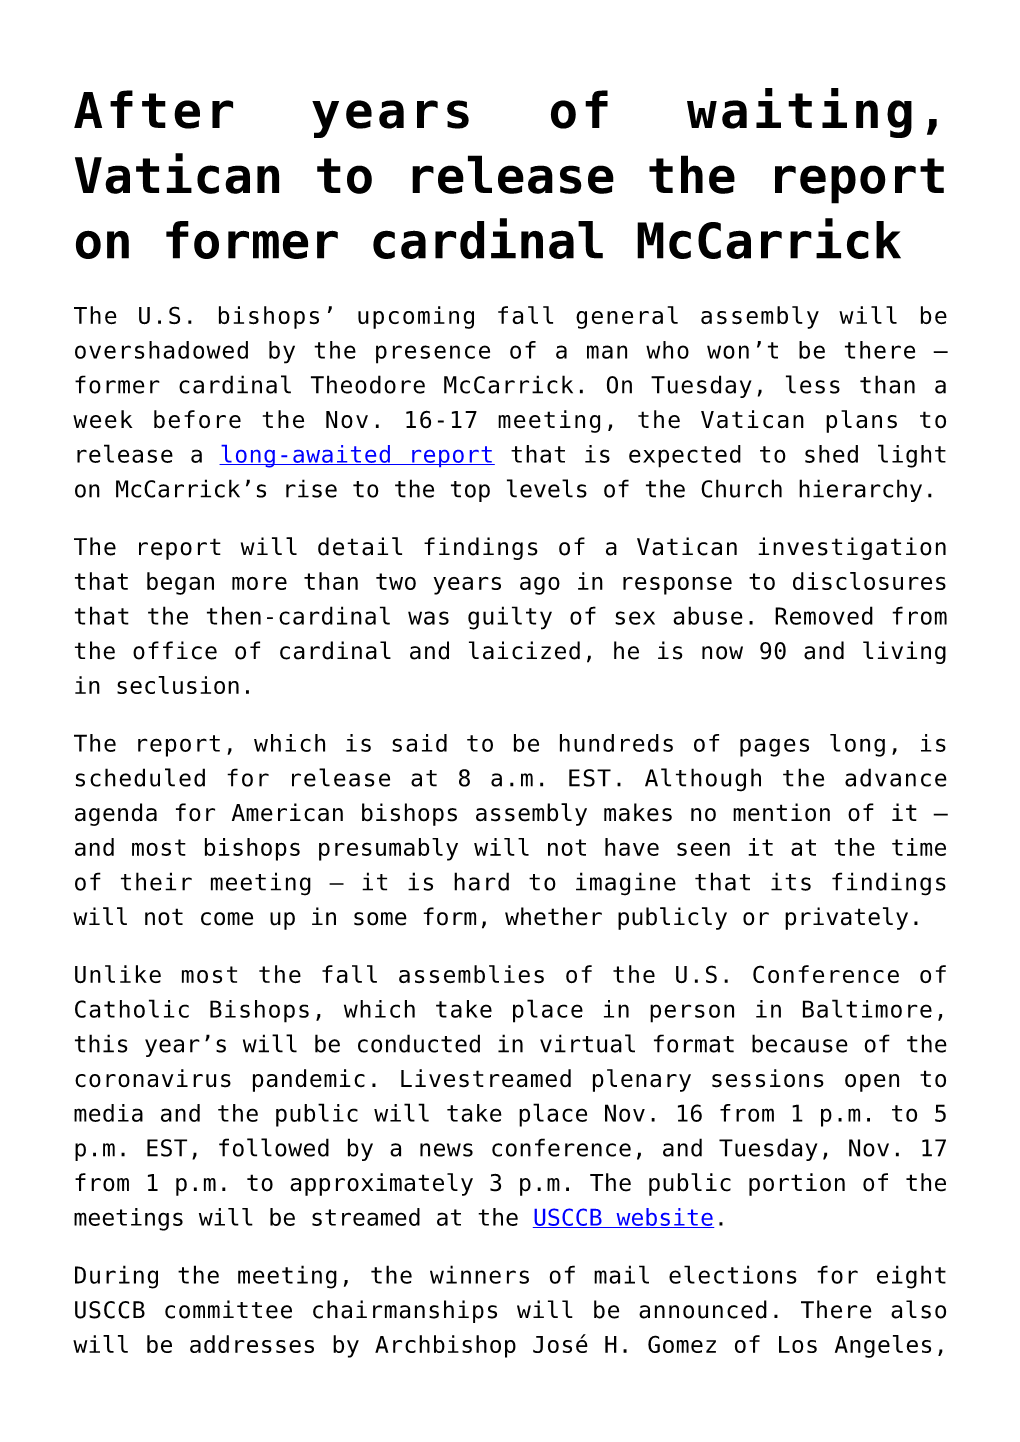 After Years of Waiting, Vatican to Release the Report on Former Cardinal Mccarrick